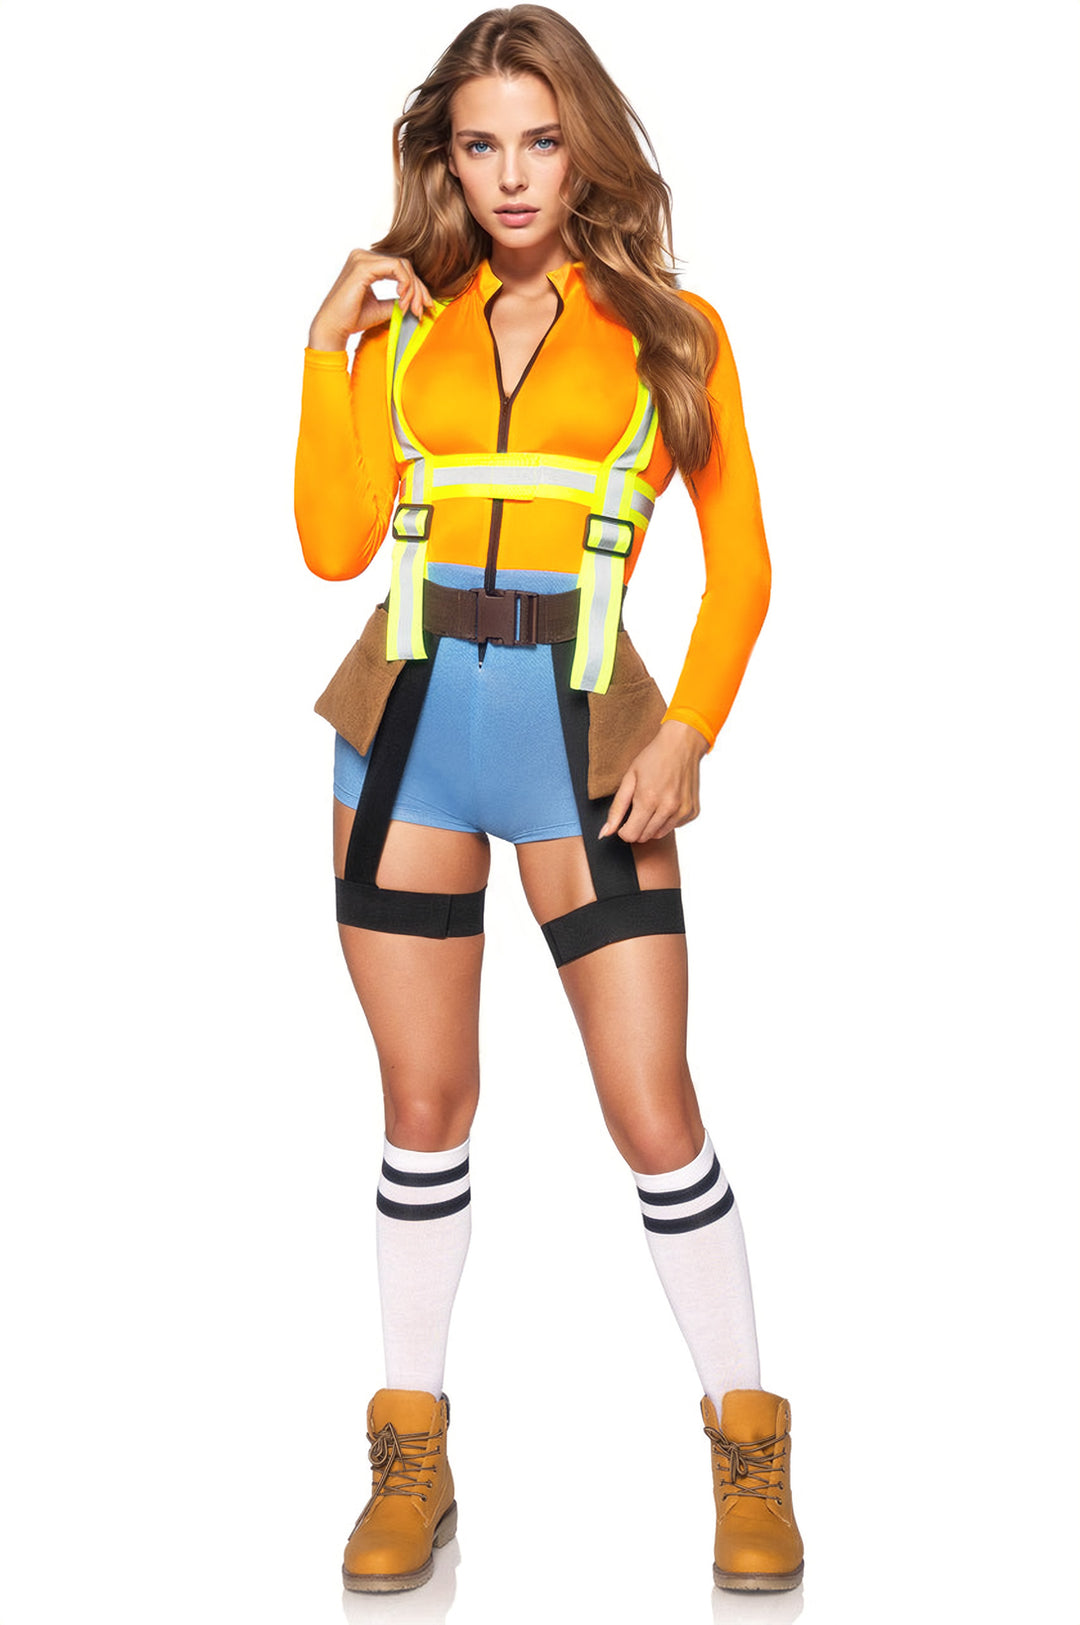 Nailed It Construction Worker Costume